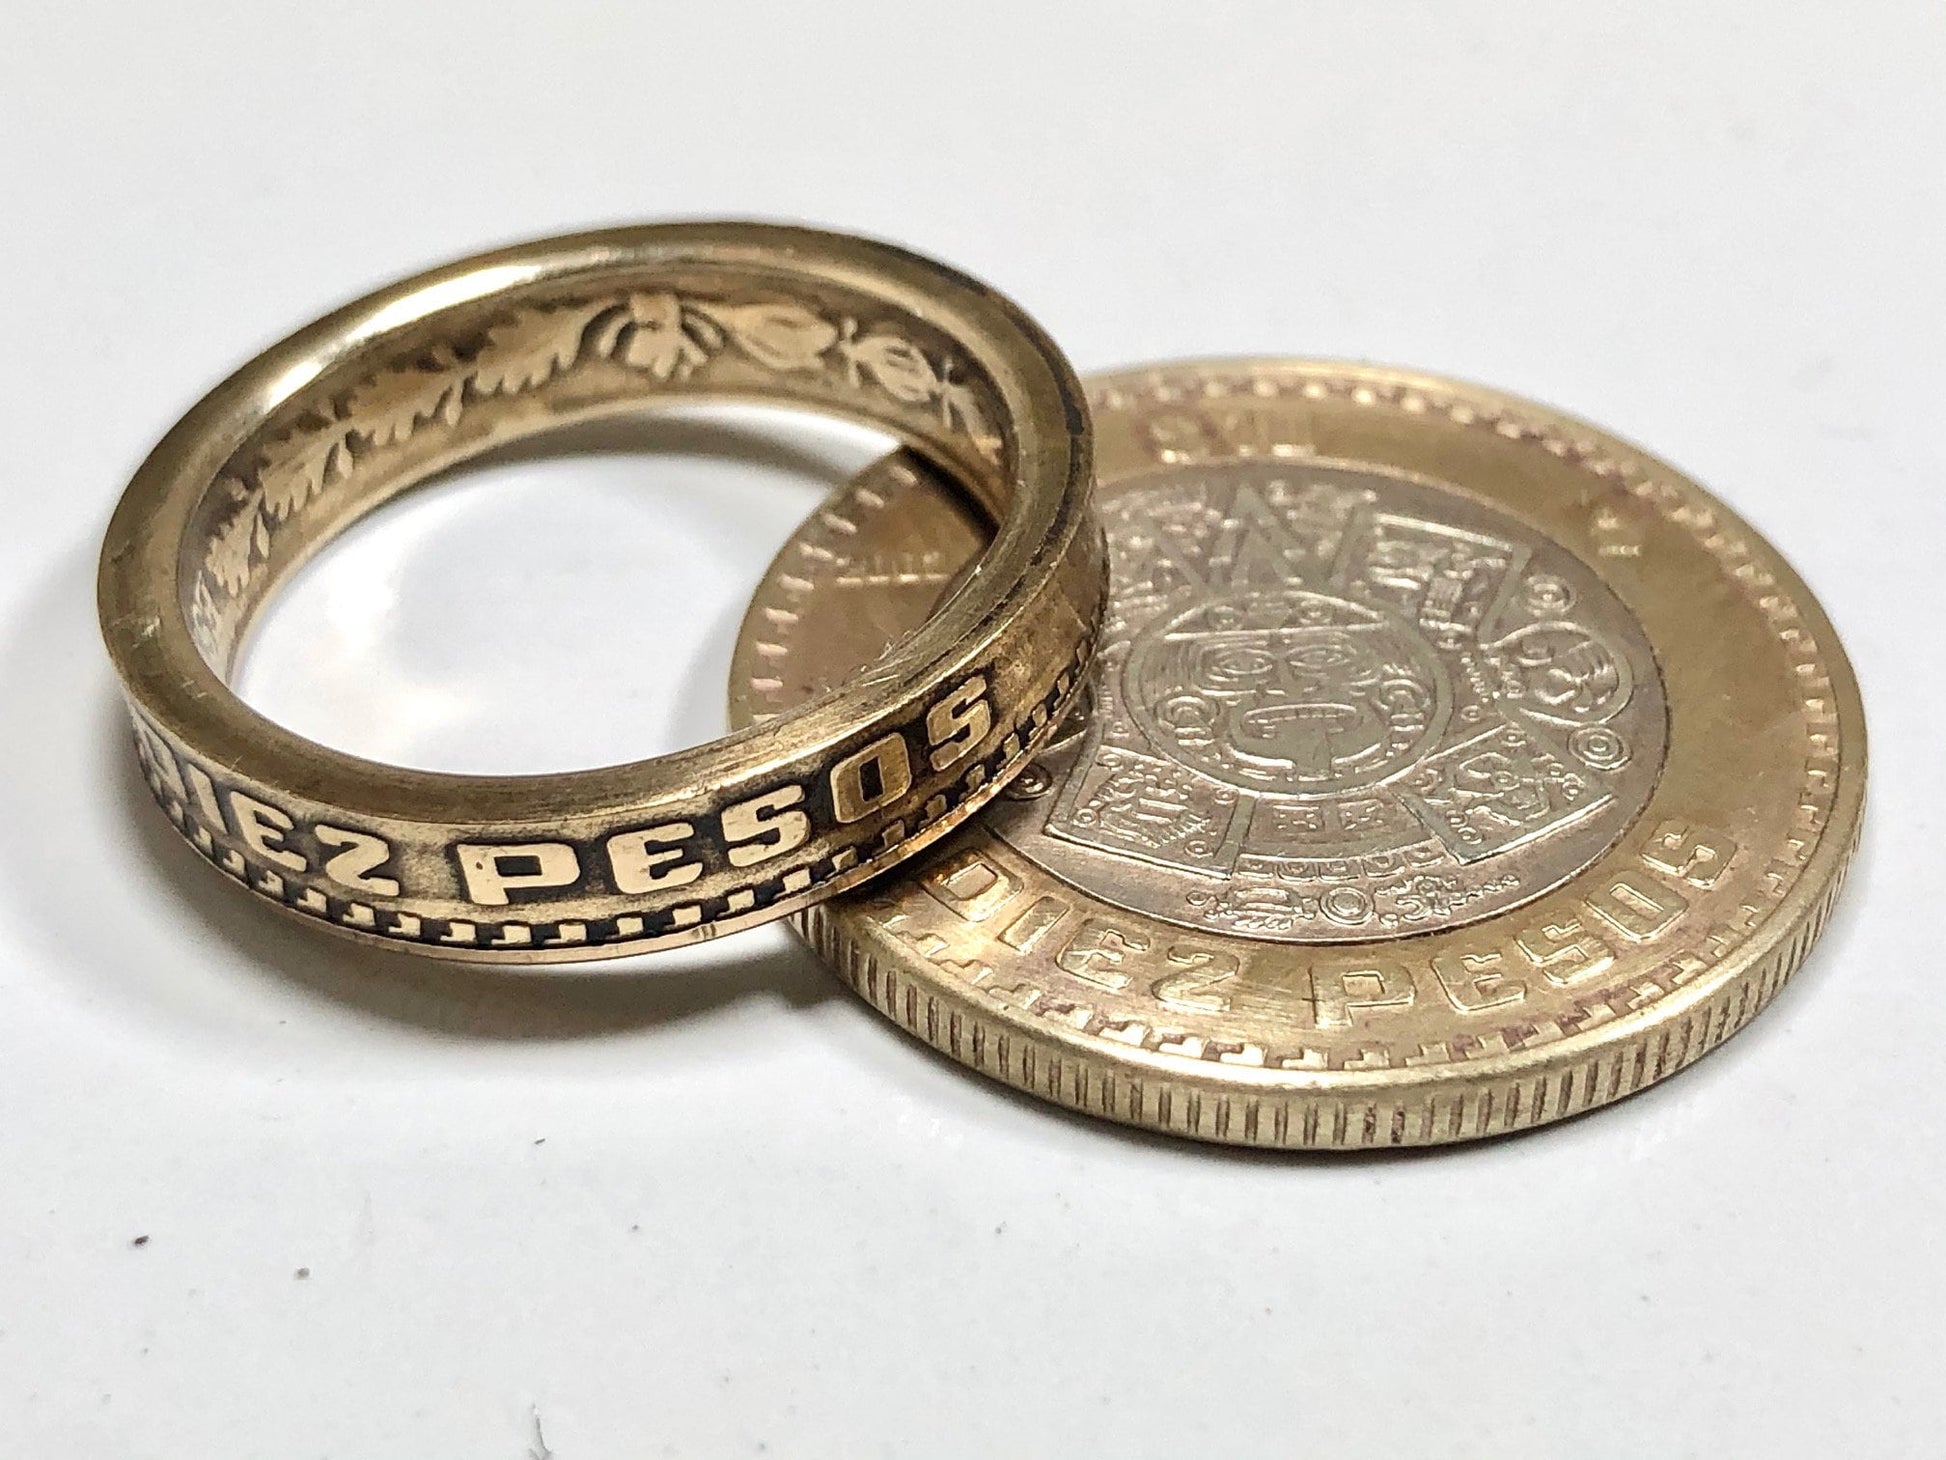 Vintage Mexico Ring Mexican 10 Peso Coin Ring Handmade Personal Jewelry Ring Gift For Friend Coin Ring Gift For Him Her World Coin Collector